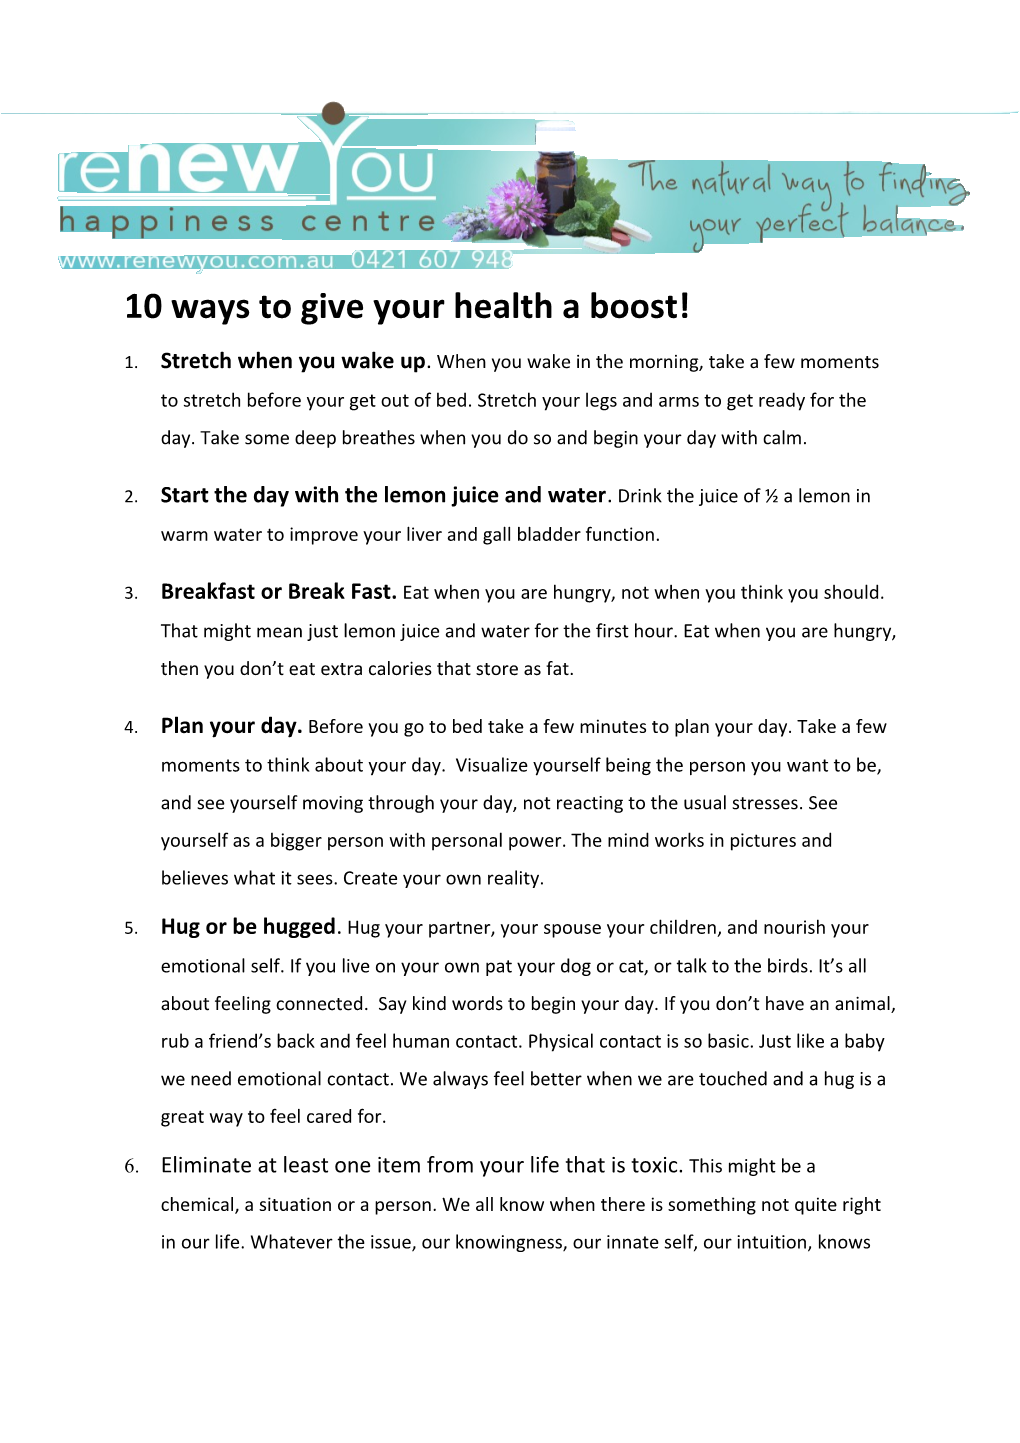 10 Ways to Give Your Health a Boost!